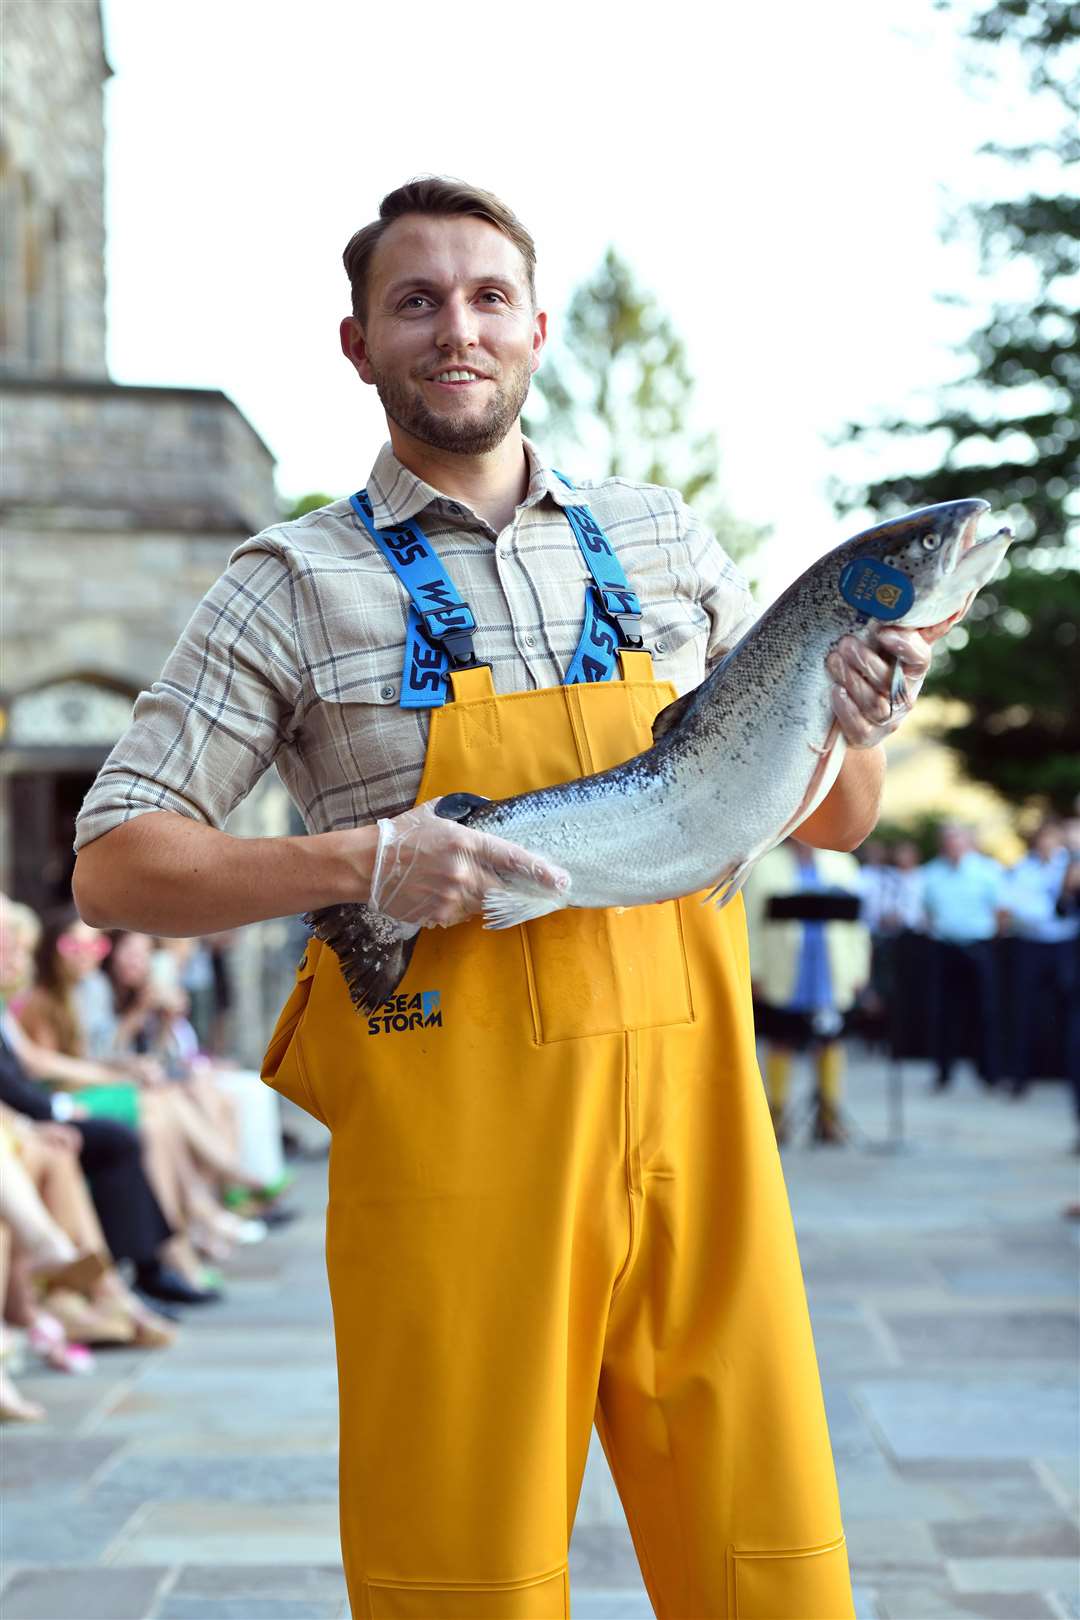 Loch Duart was represented at the Dressed to Kilt event by Adam Gray, marketing and communications manager. He is seen here dressed in farming gear and holding a Loch Duart salmon.